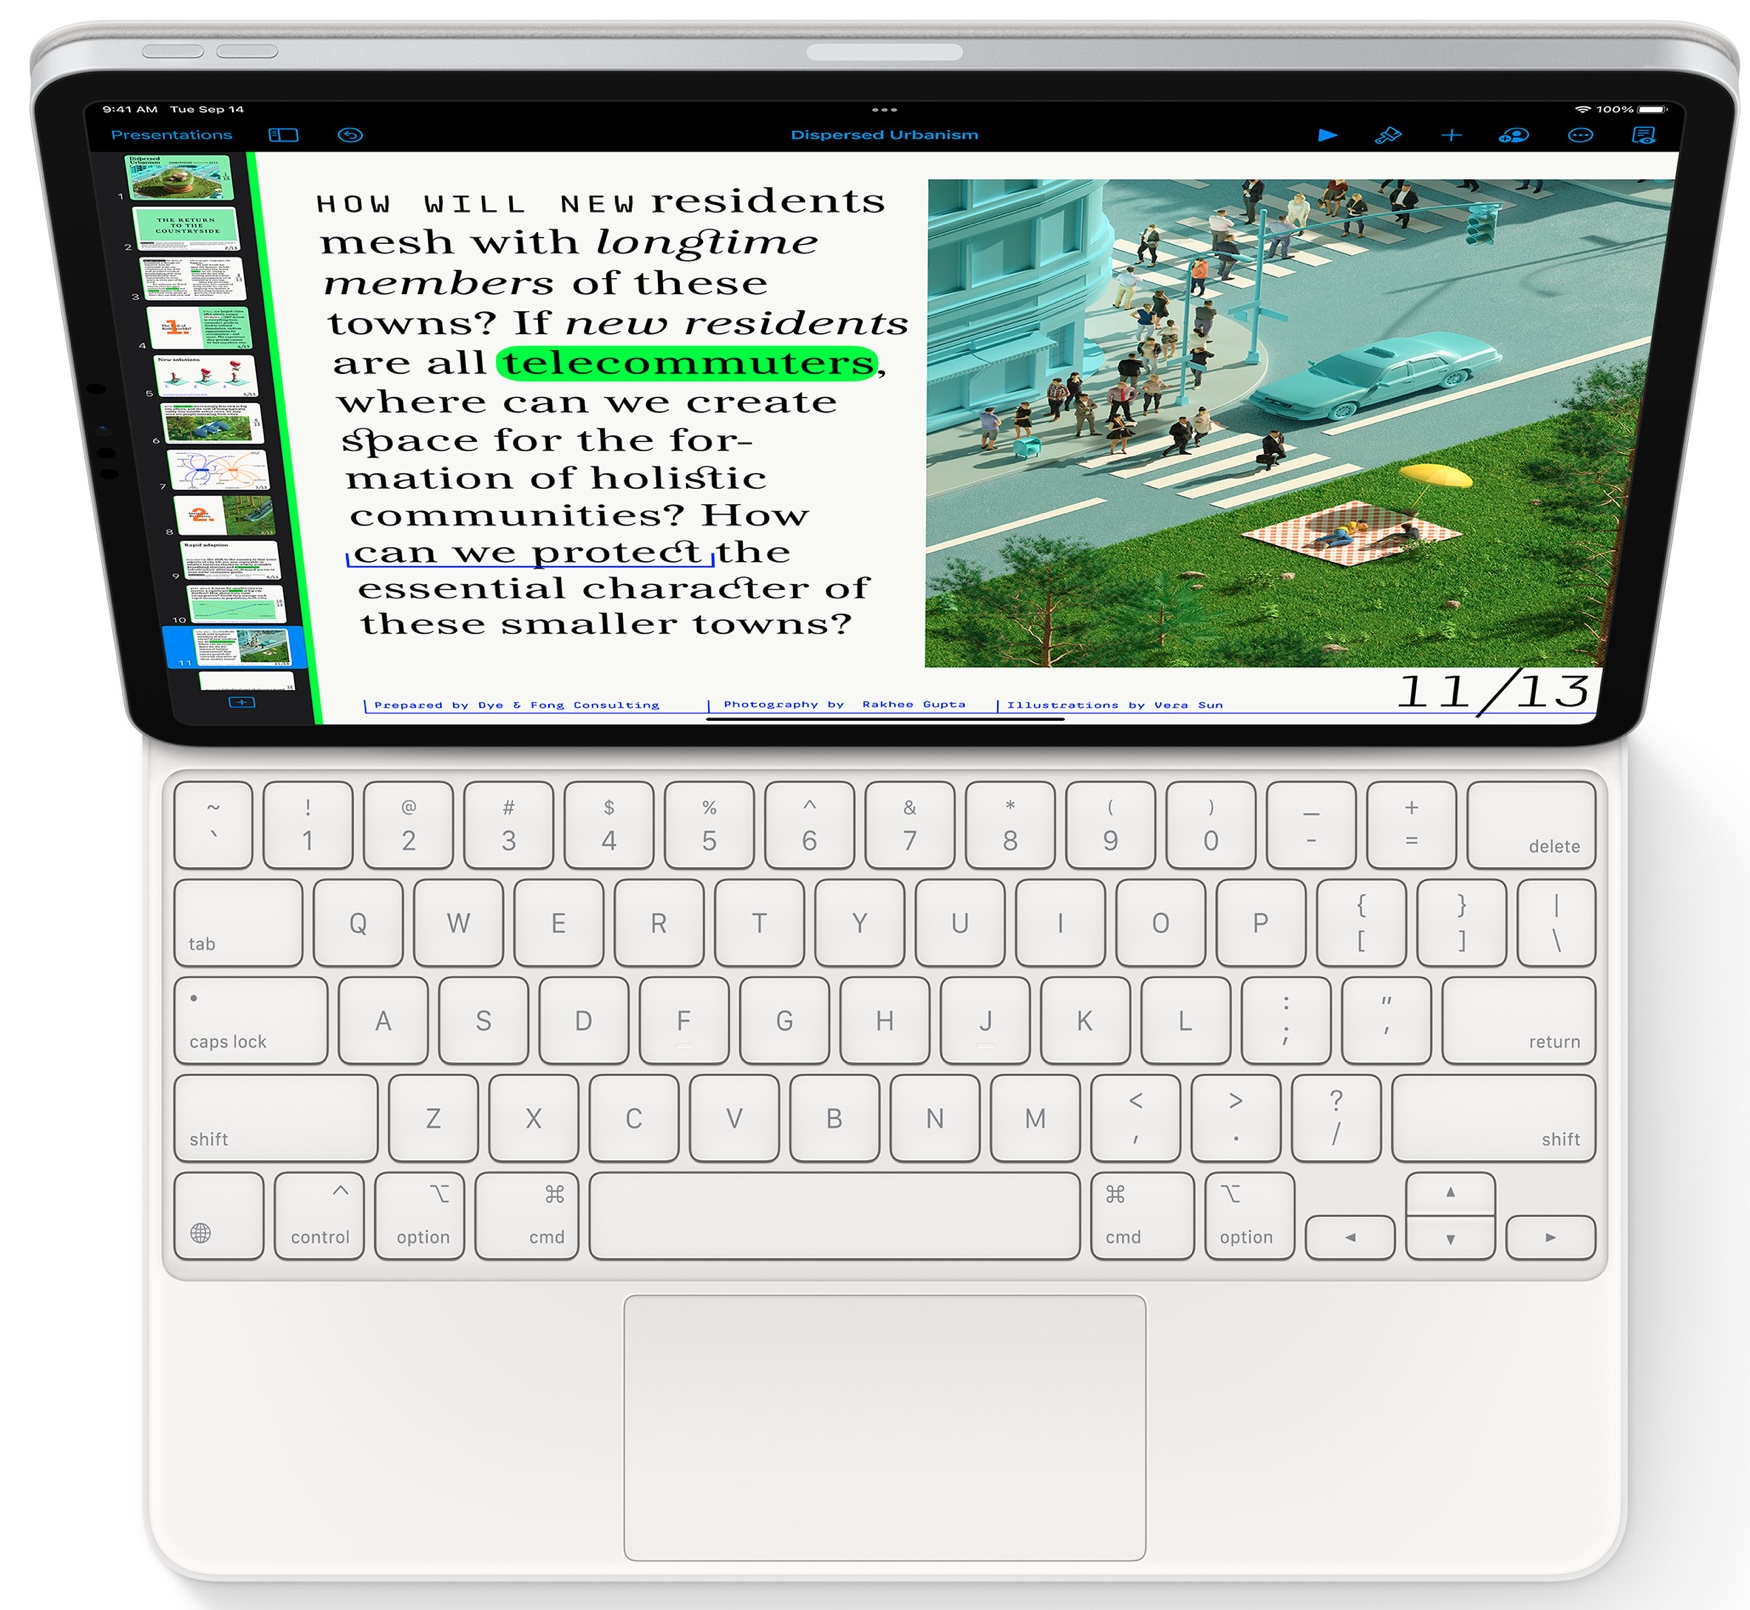 How to Check Magic Keyboard Battery on Ipad?